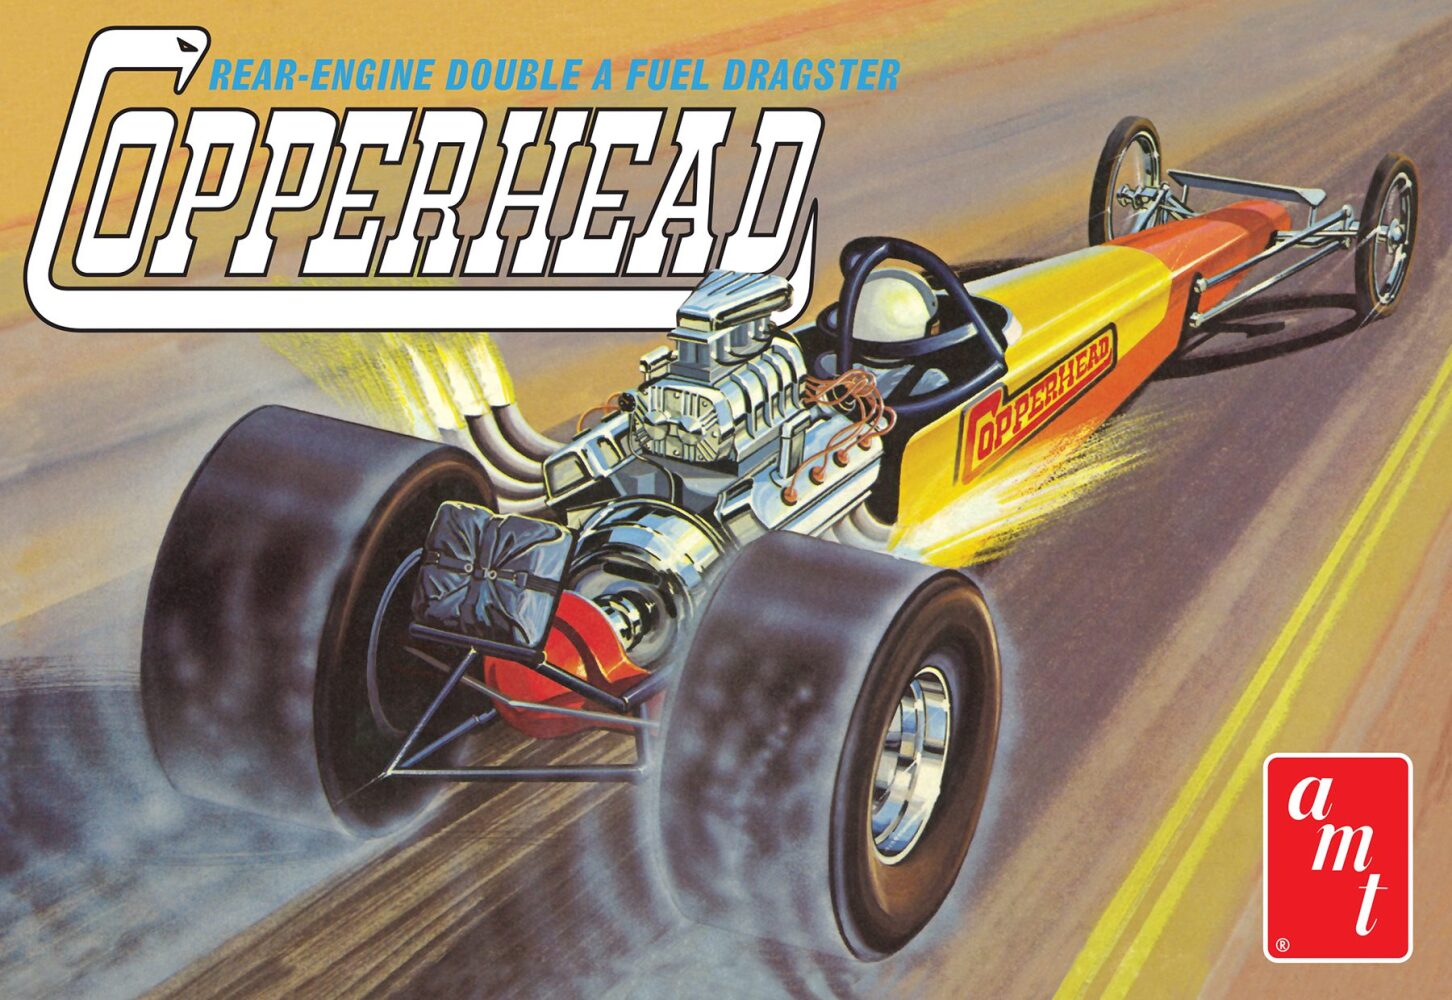 COPPERHEAD REAR-ENGINE DRAGSTER